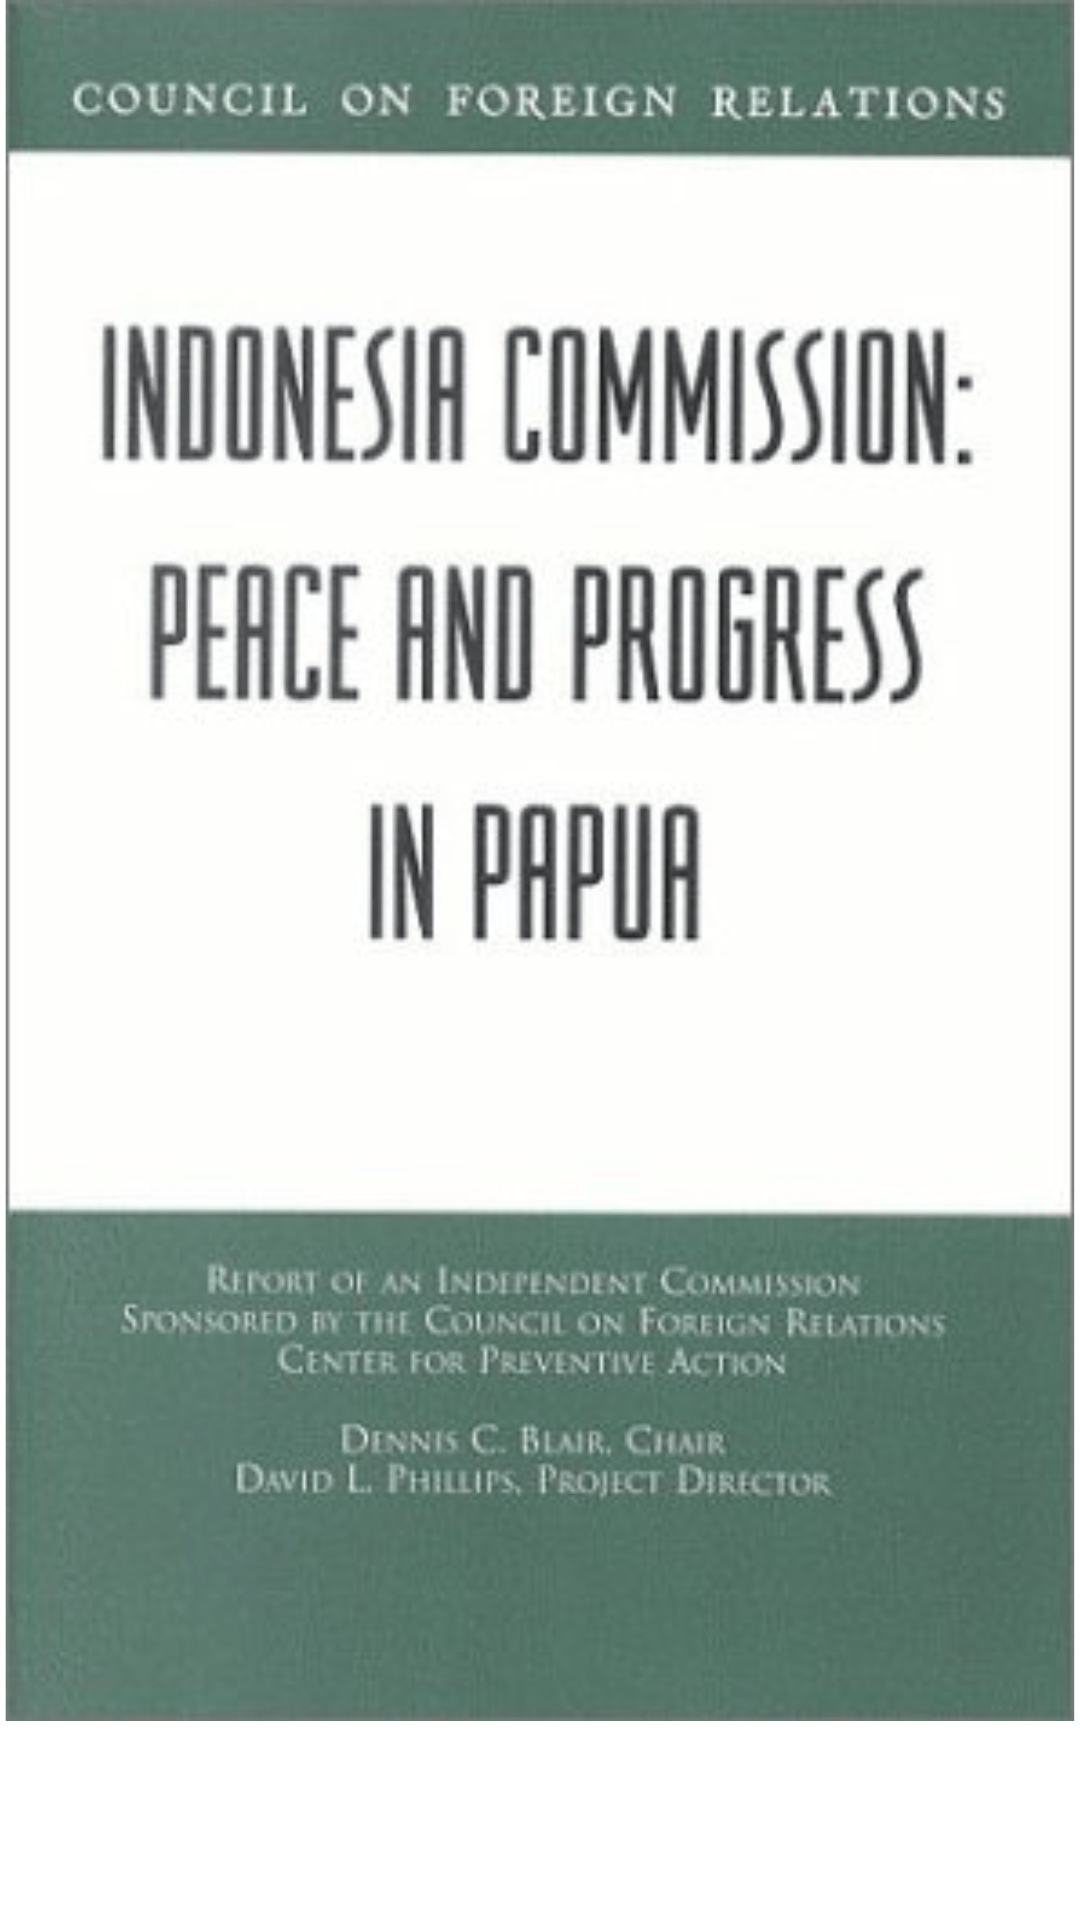 Indonesia Commission: Peace and Progress in Papua